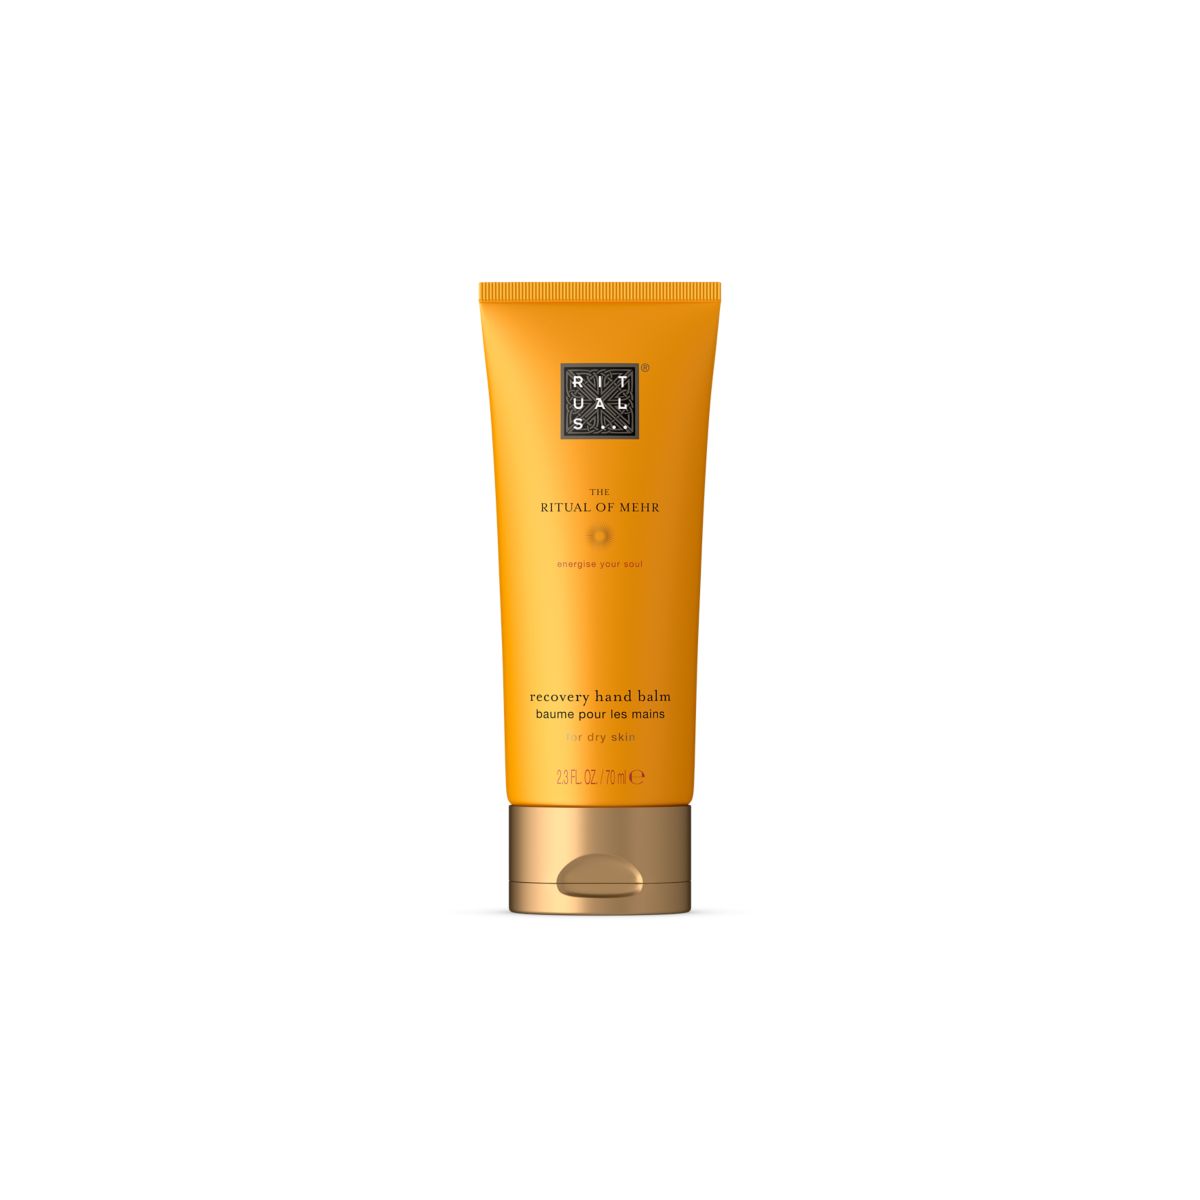 Rituals The Ritual of Mehr Recovery Hand Balm